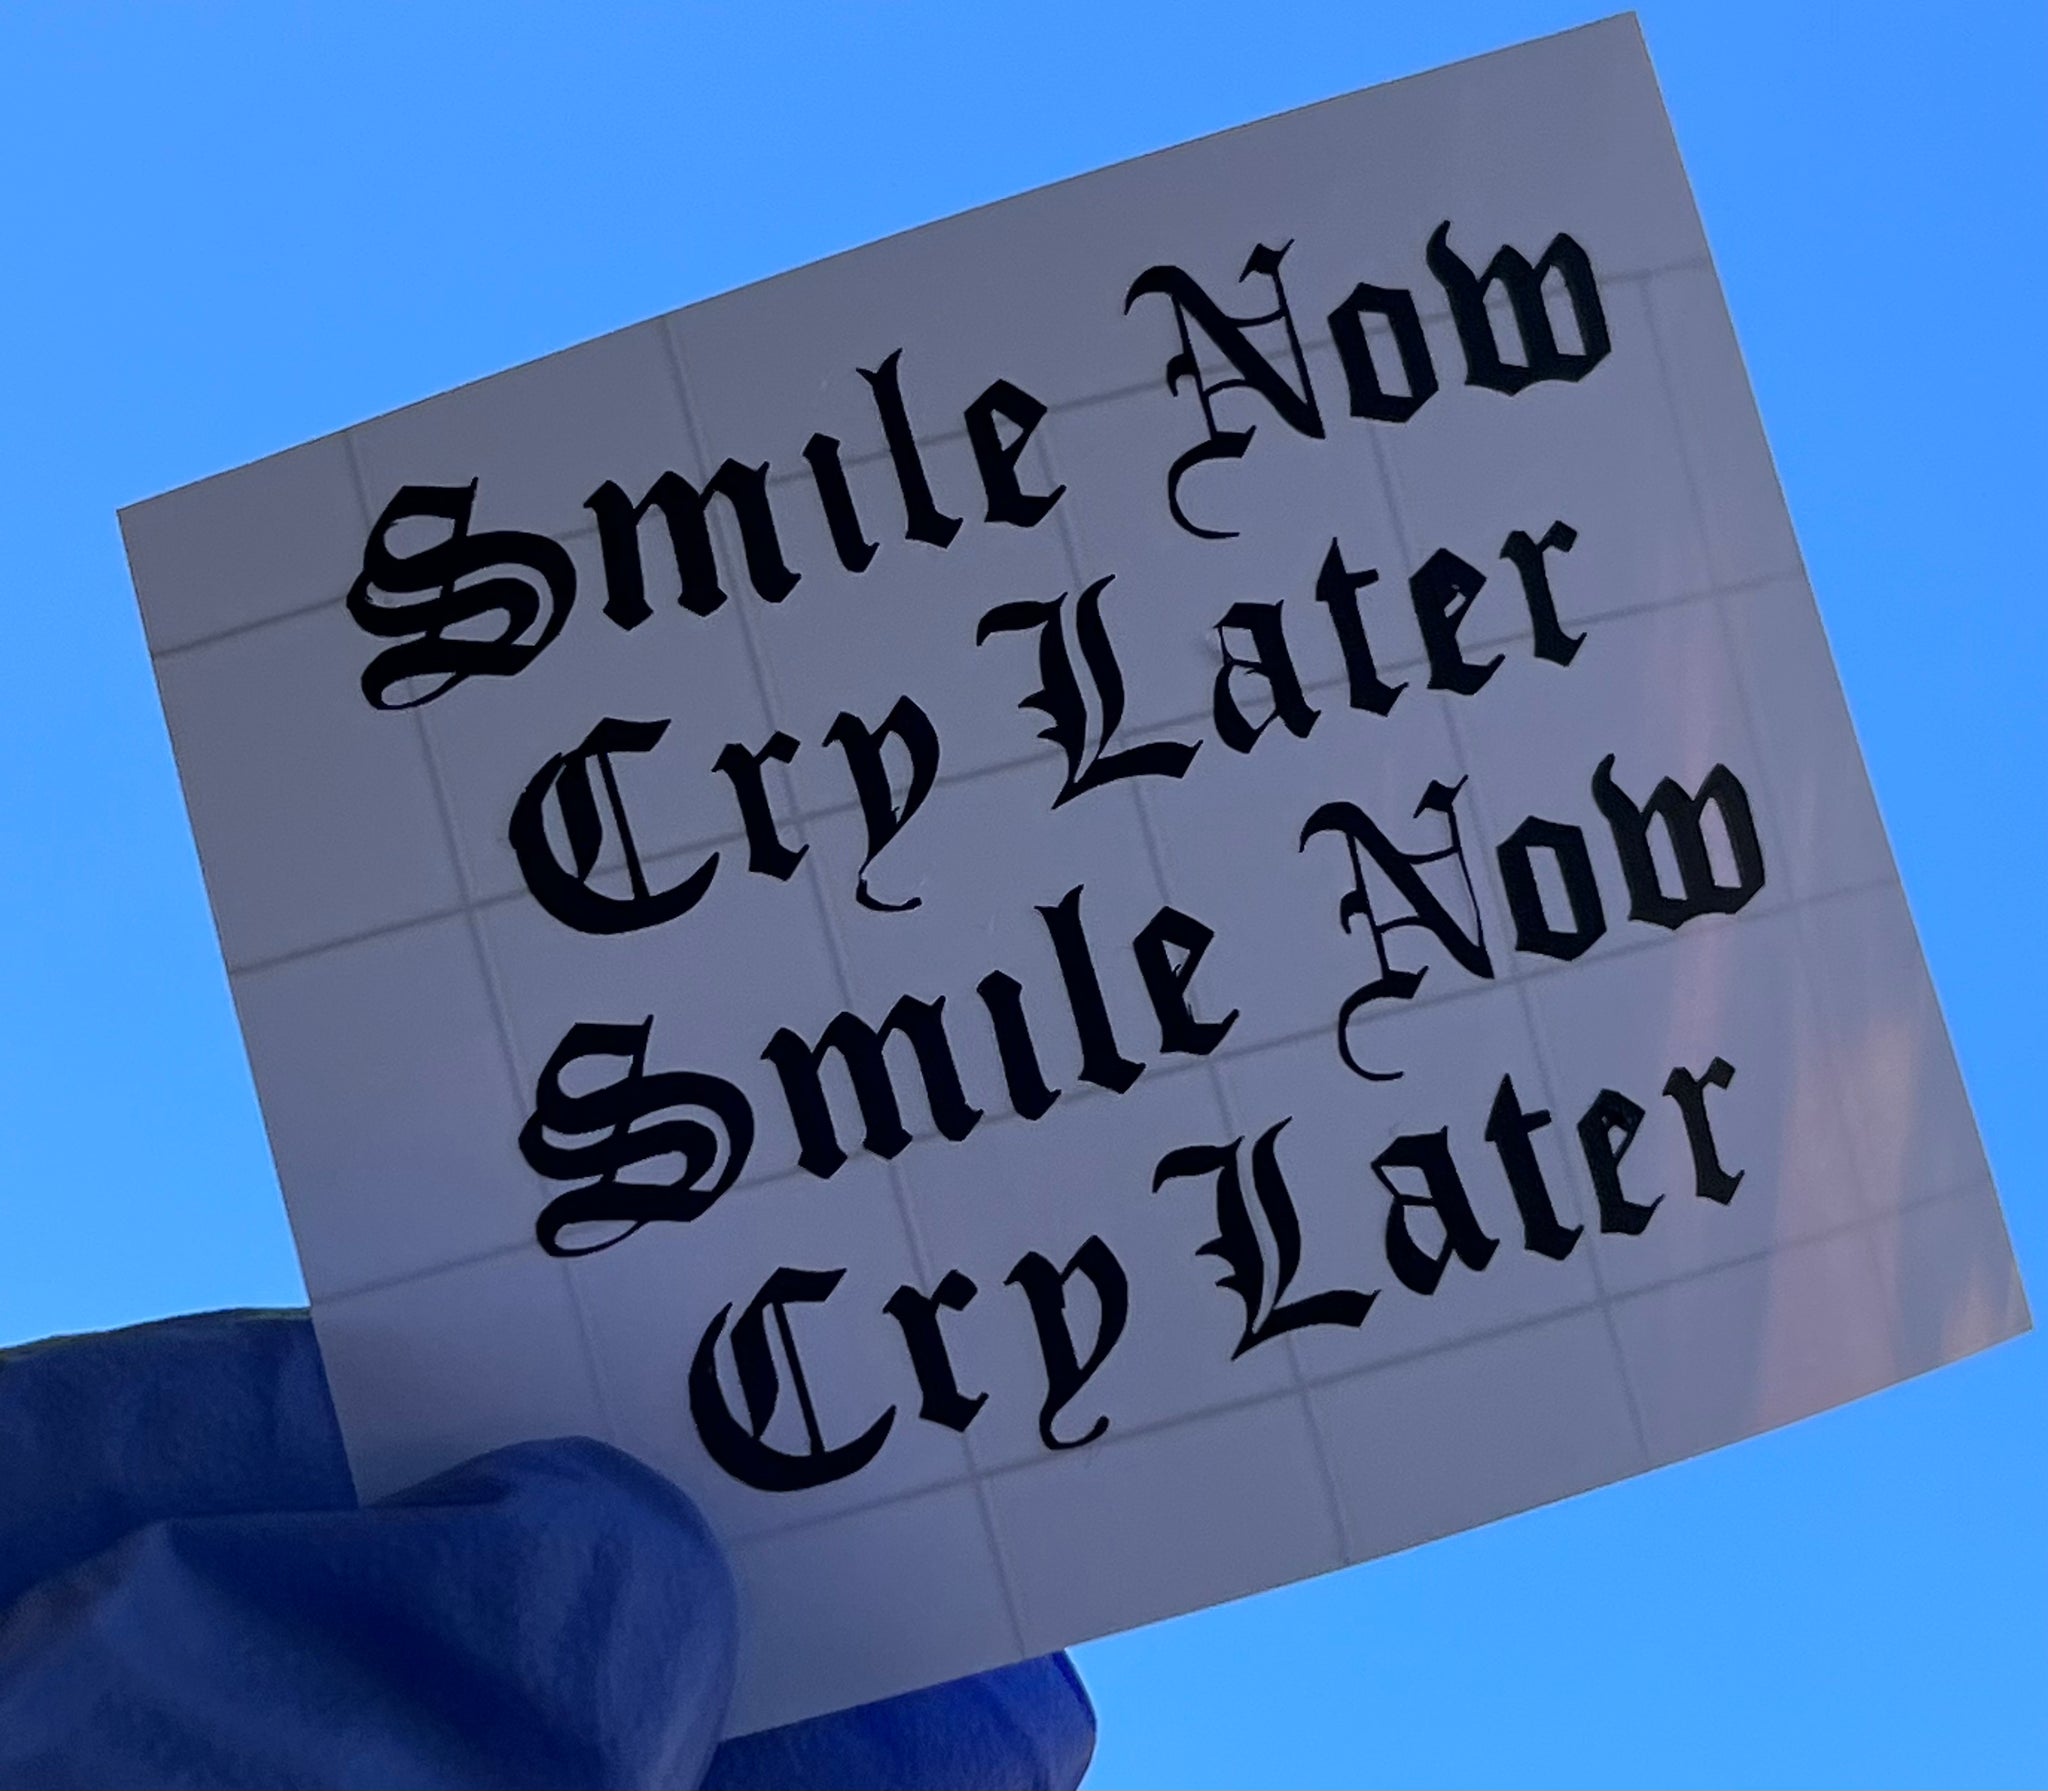 Smile now, cry later